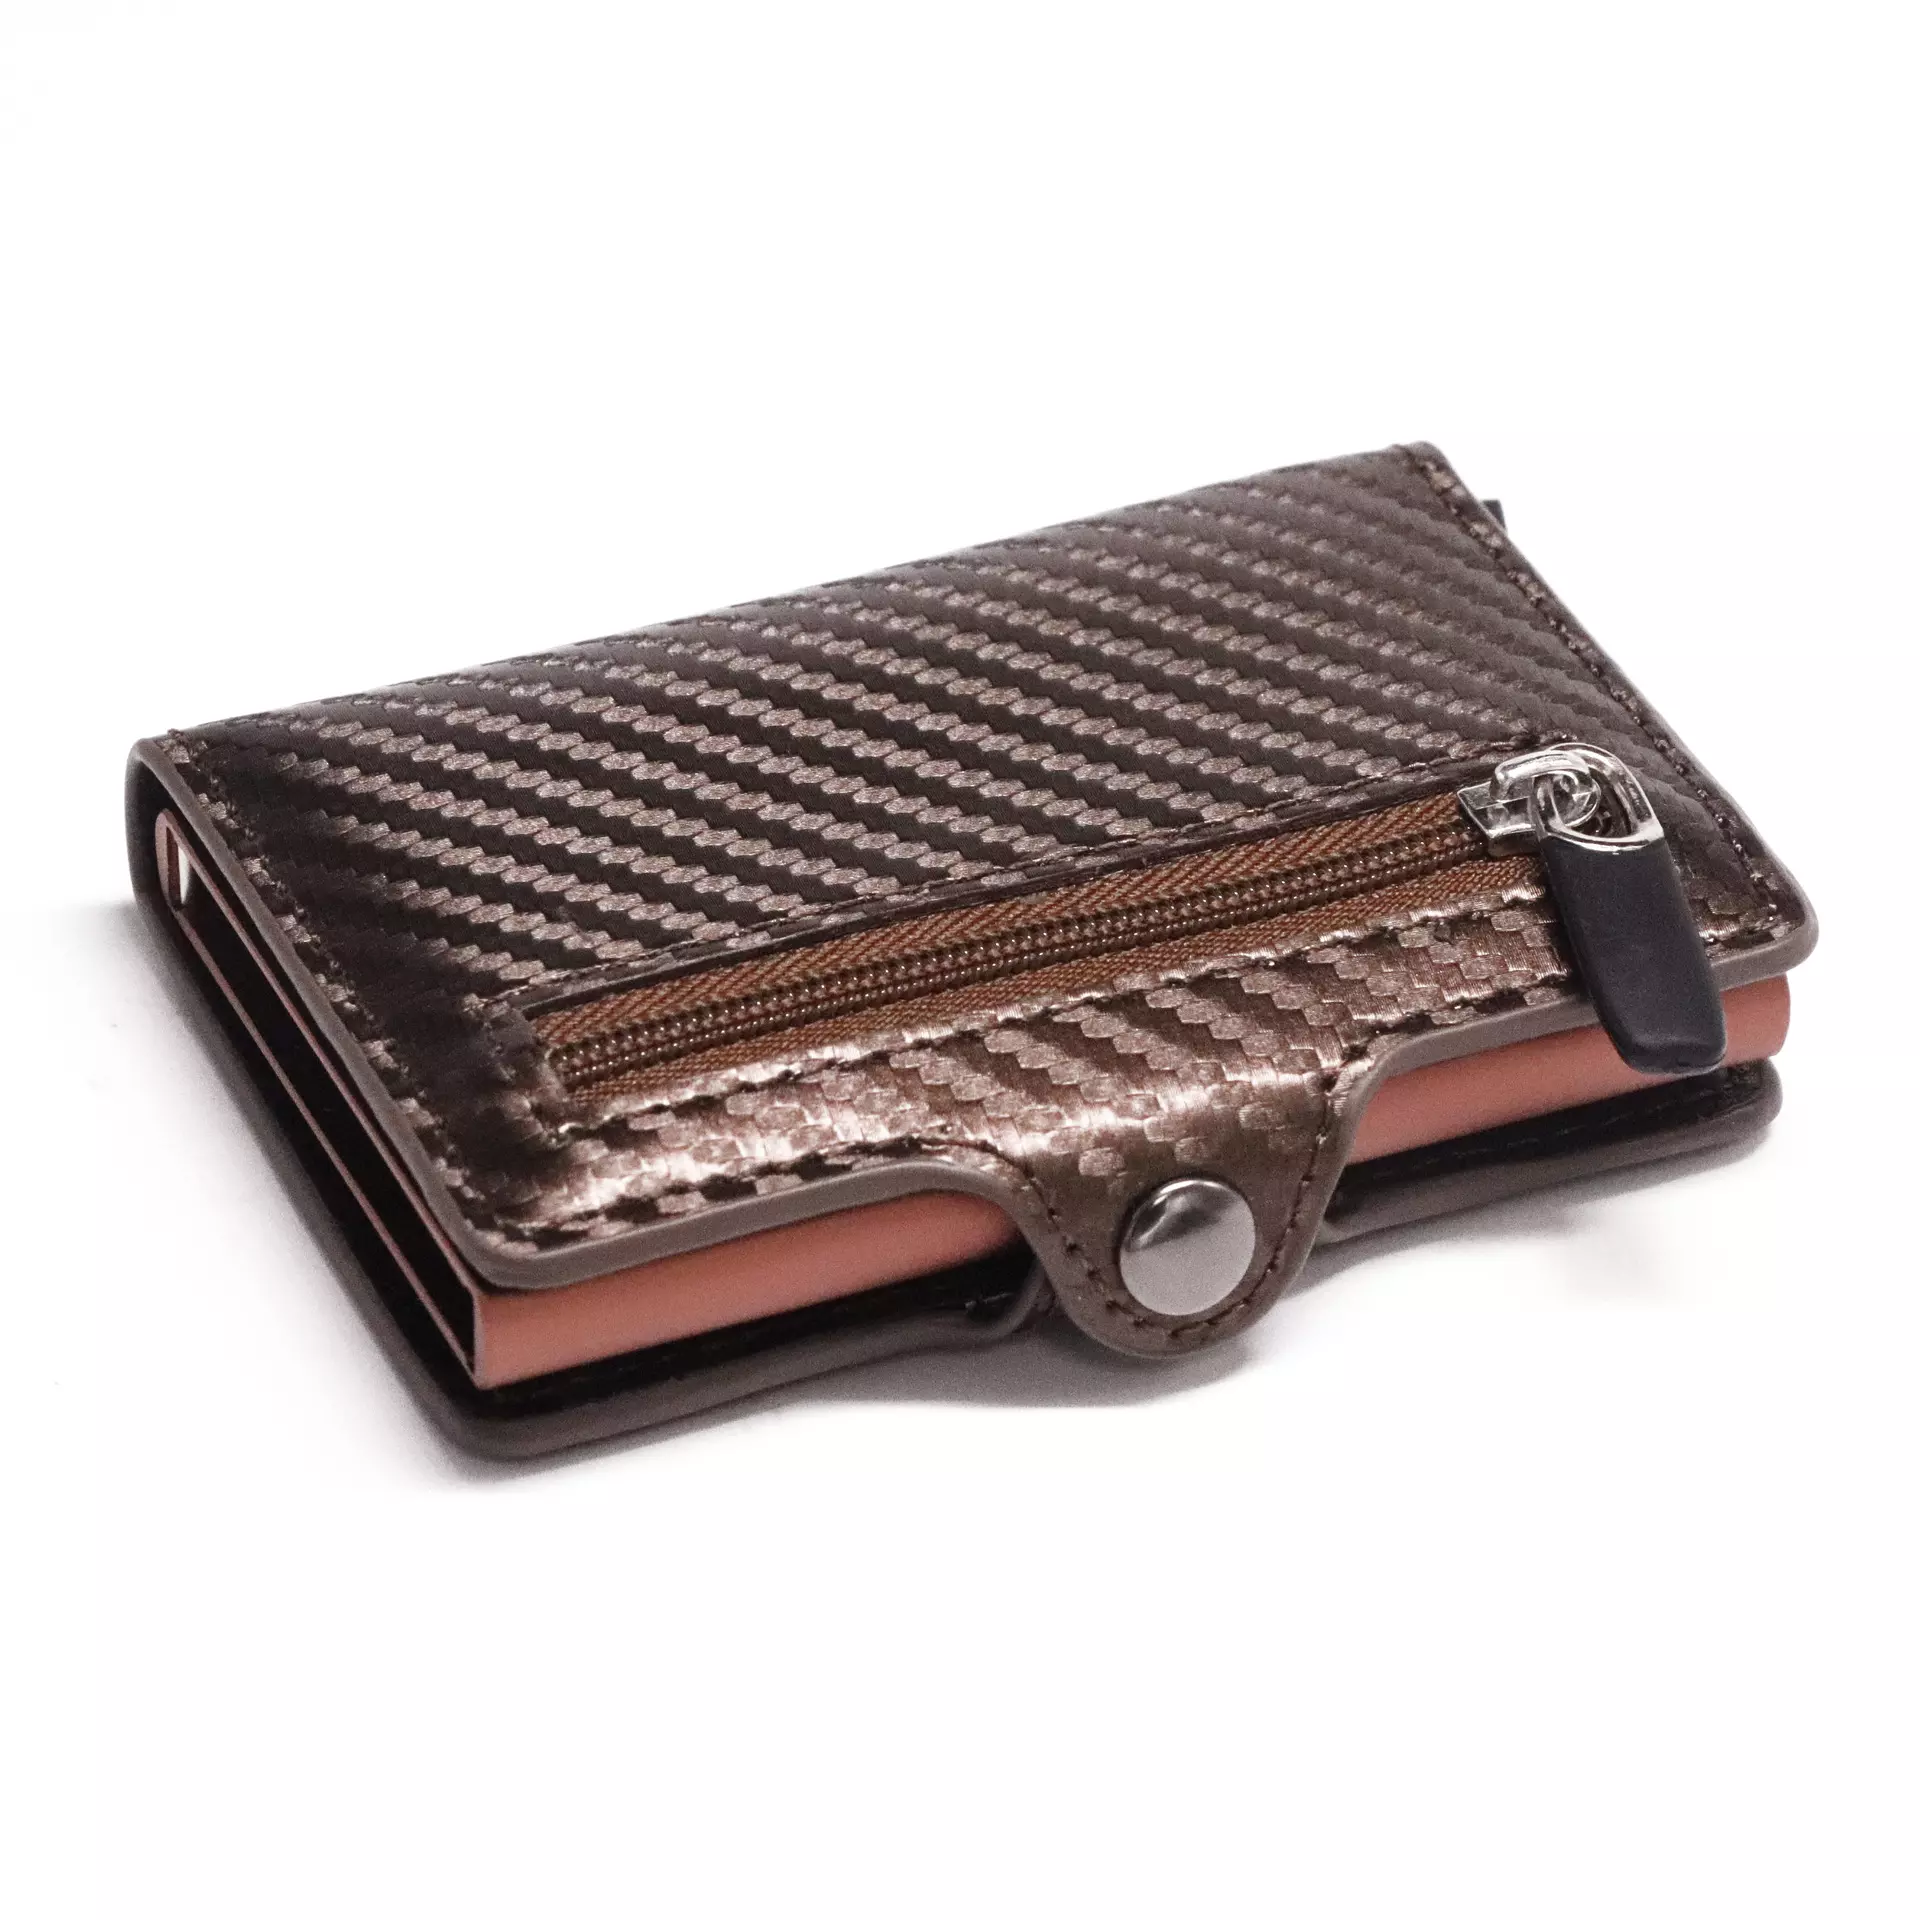 Account card / credit card &amp; ID holder RFID Carbon Fiber Style Brown